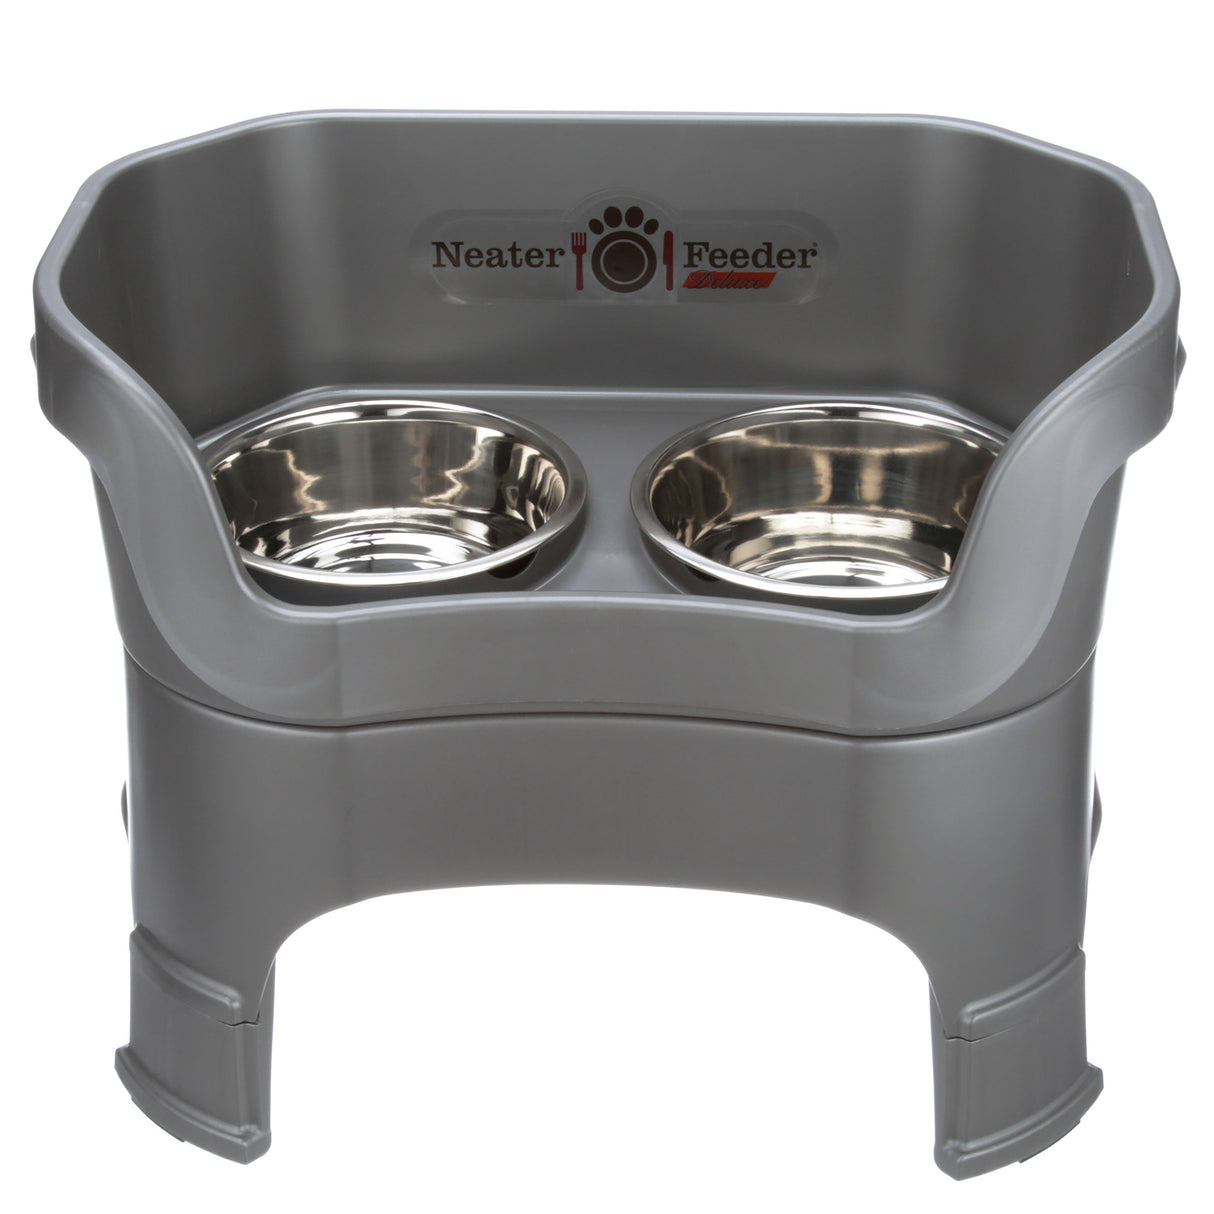 Deluxe large Neater Feeder in Gunmetal Grey with leg extensions